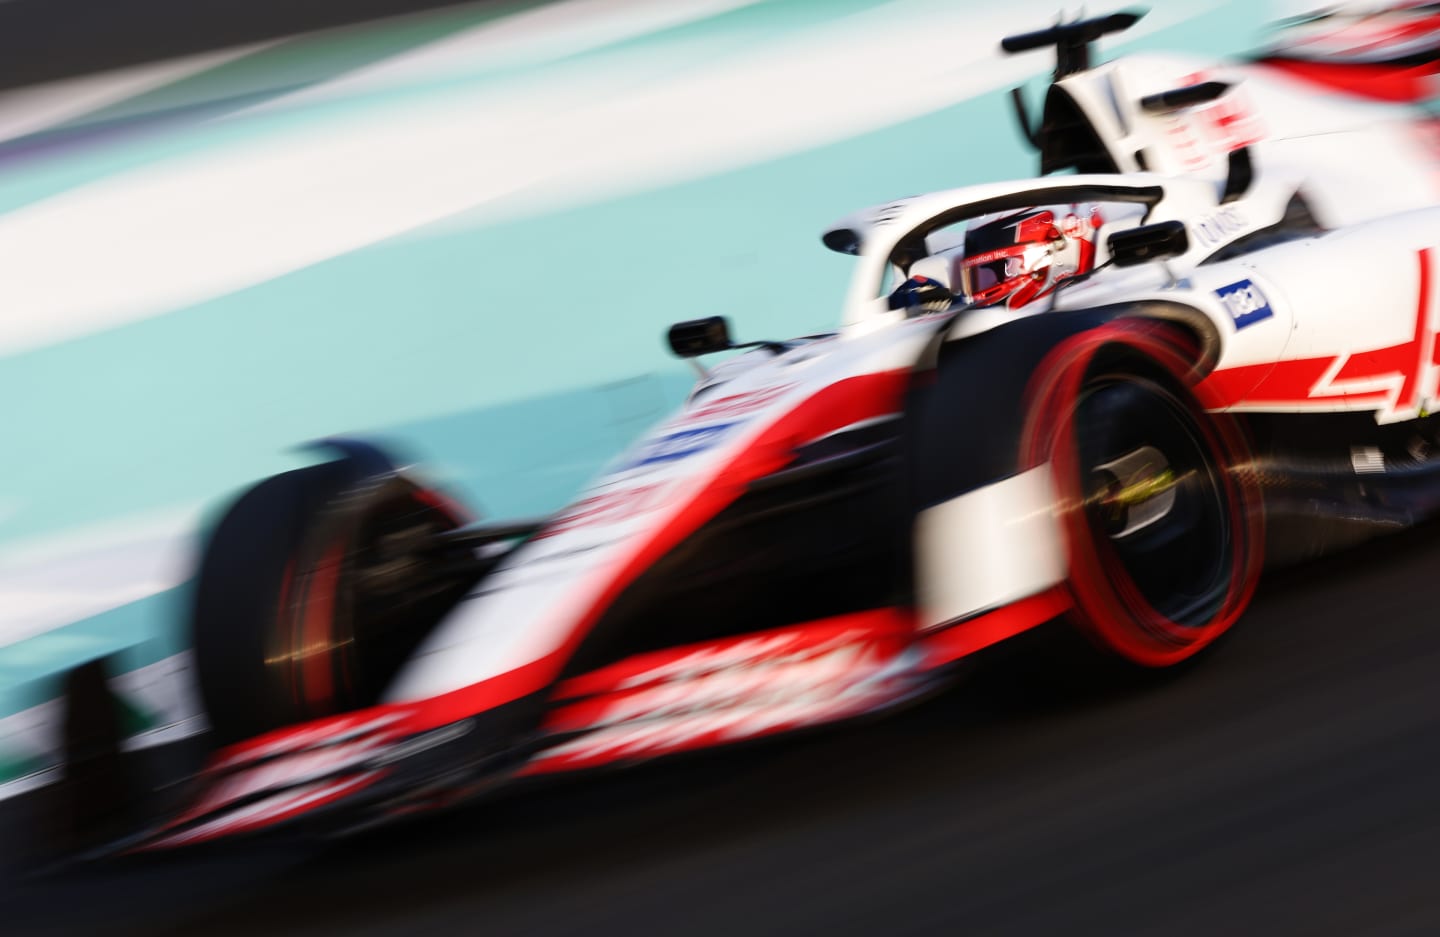 JEDDAH, SAUDI ARABIA - MARCH 26: Kevin Magnussen of Denmark driving the (20) Haas F1 VF-22 Ferrari on track during final practice ahead of the F1 Grand Prix of Saudi Arabia at the Jeddah Corniche Circuit on March 26, 2022 in Jeddah, Saudi Arabia. (Photo by Lars Baron/Getty Images)